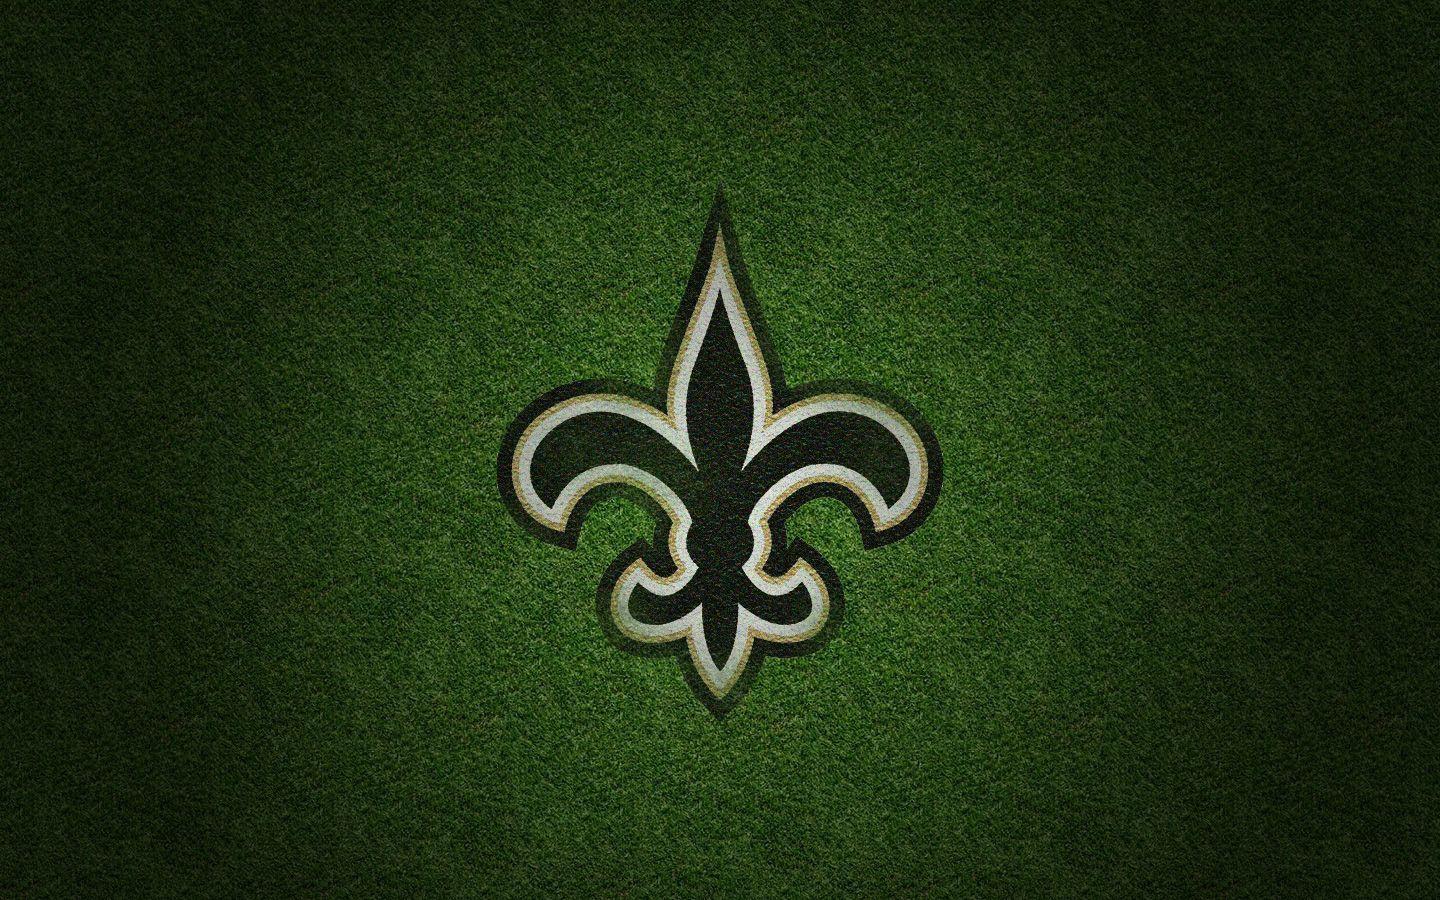 Ultimate New Orleans Saints Wallpaper logo collect